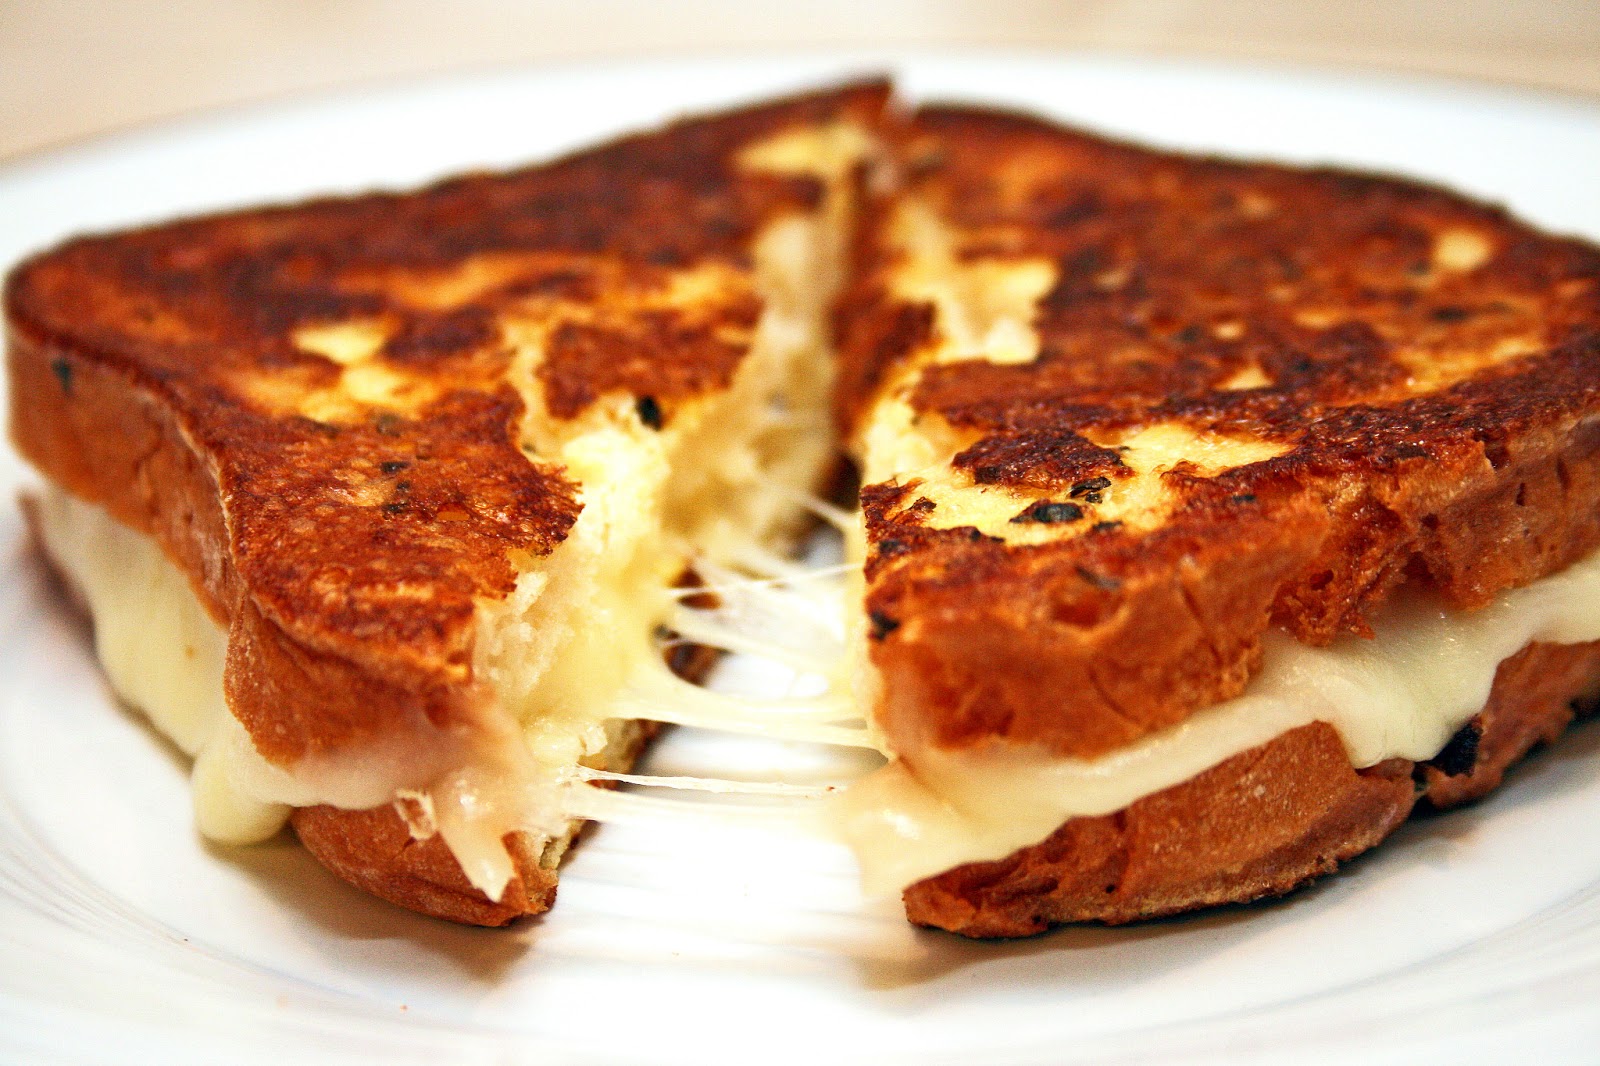 Grilled Sandwich Recipes - m